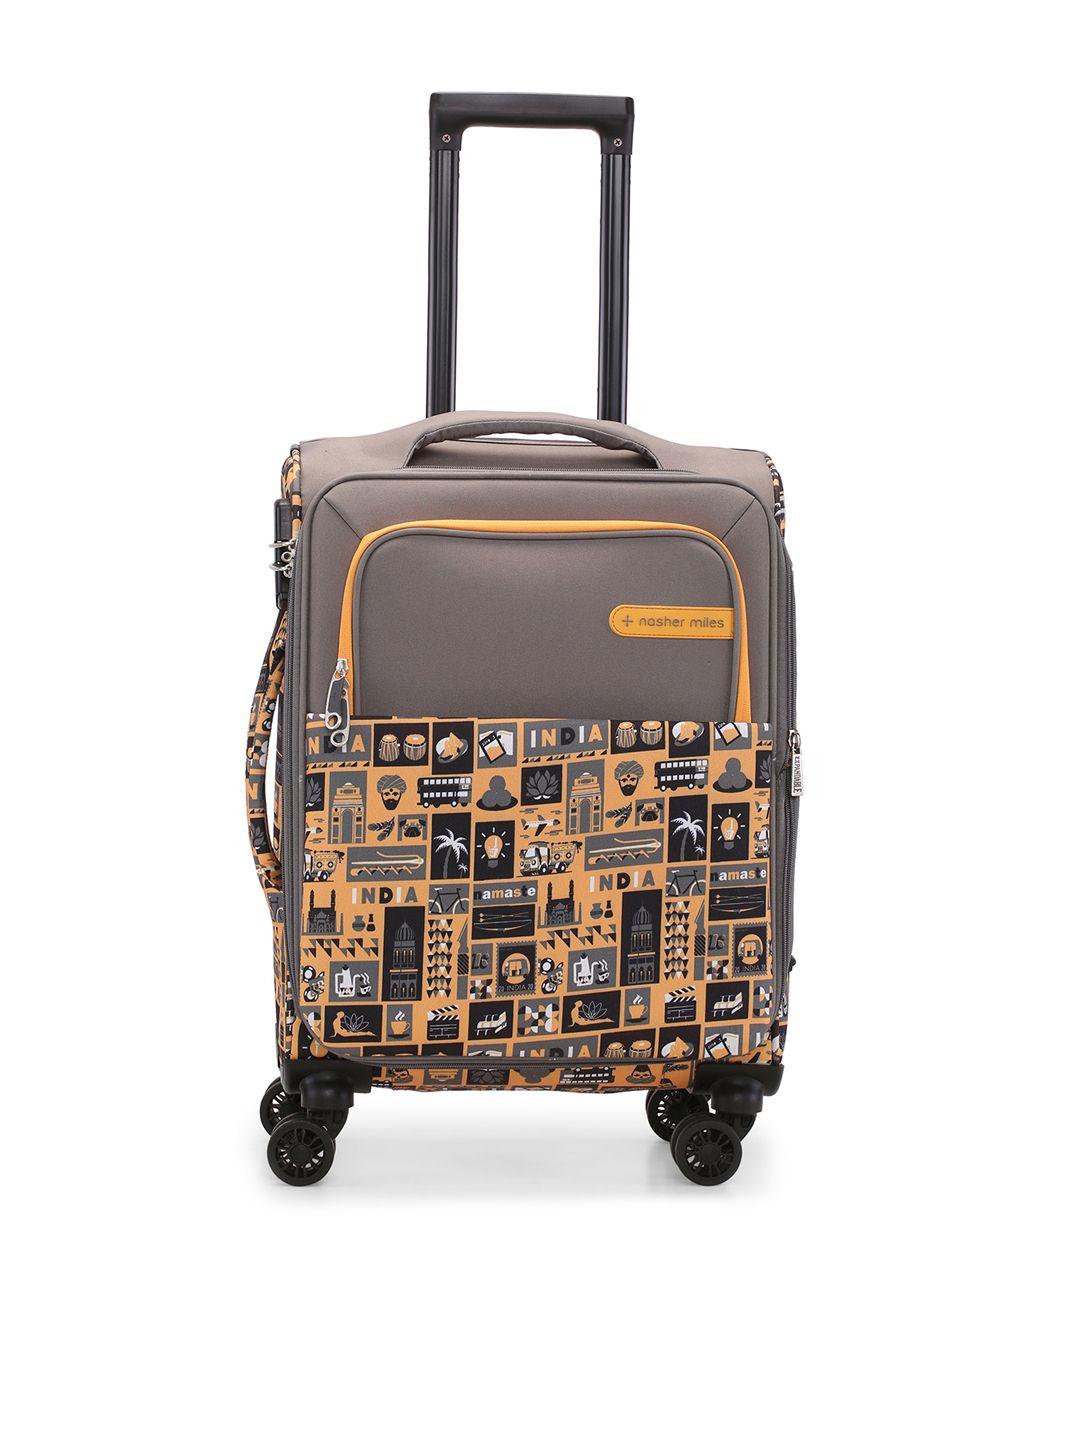 nasher miles printed soft-sided trolley suitcase